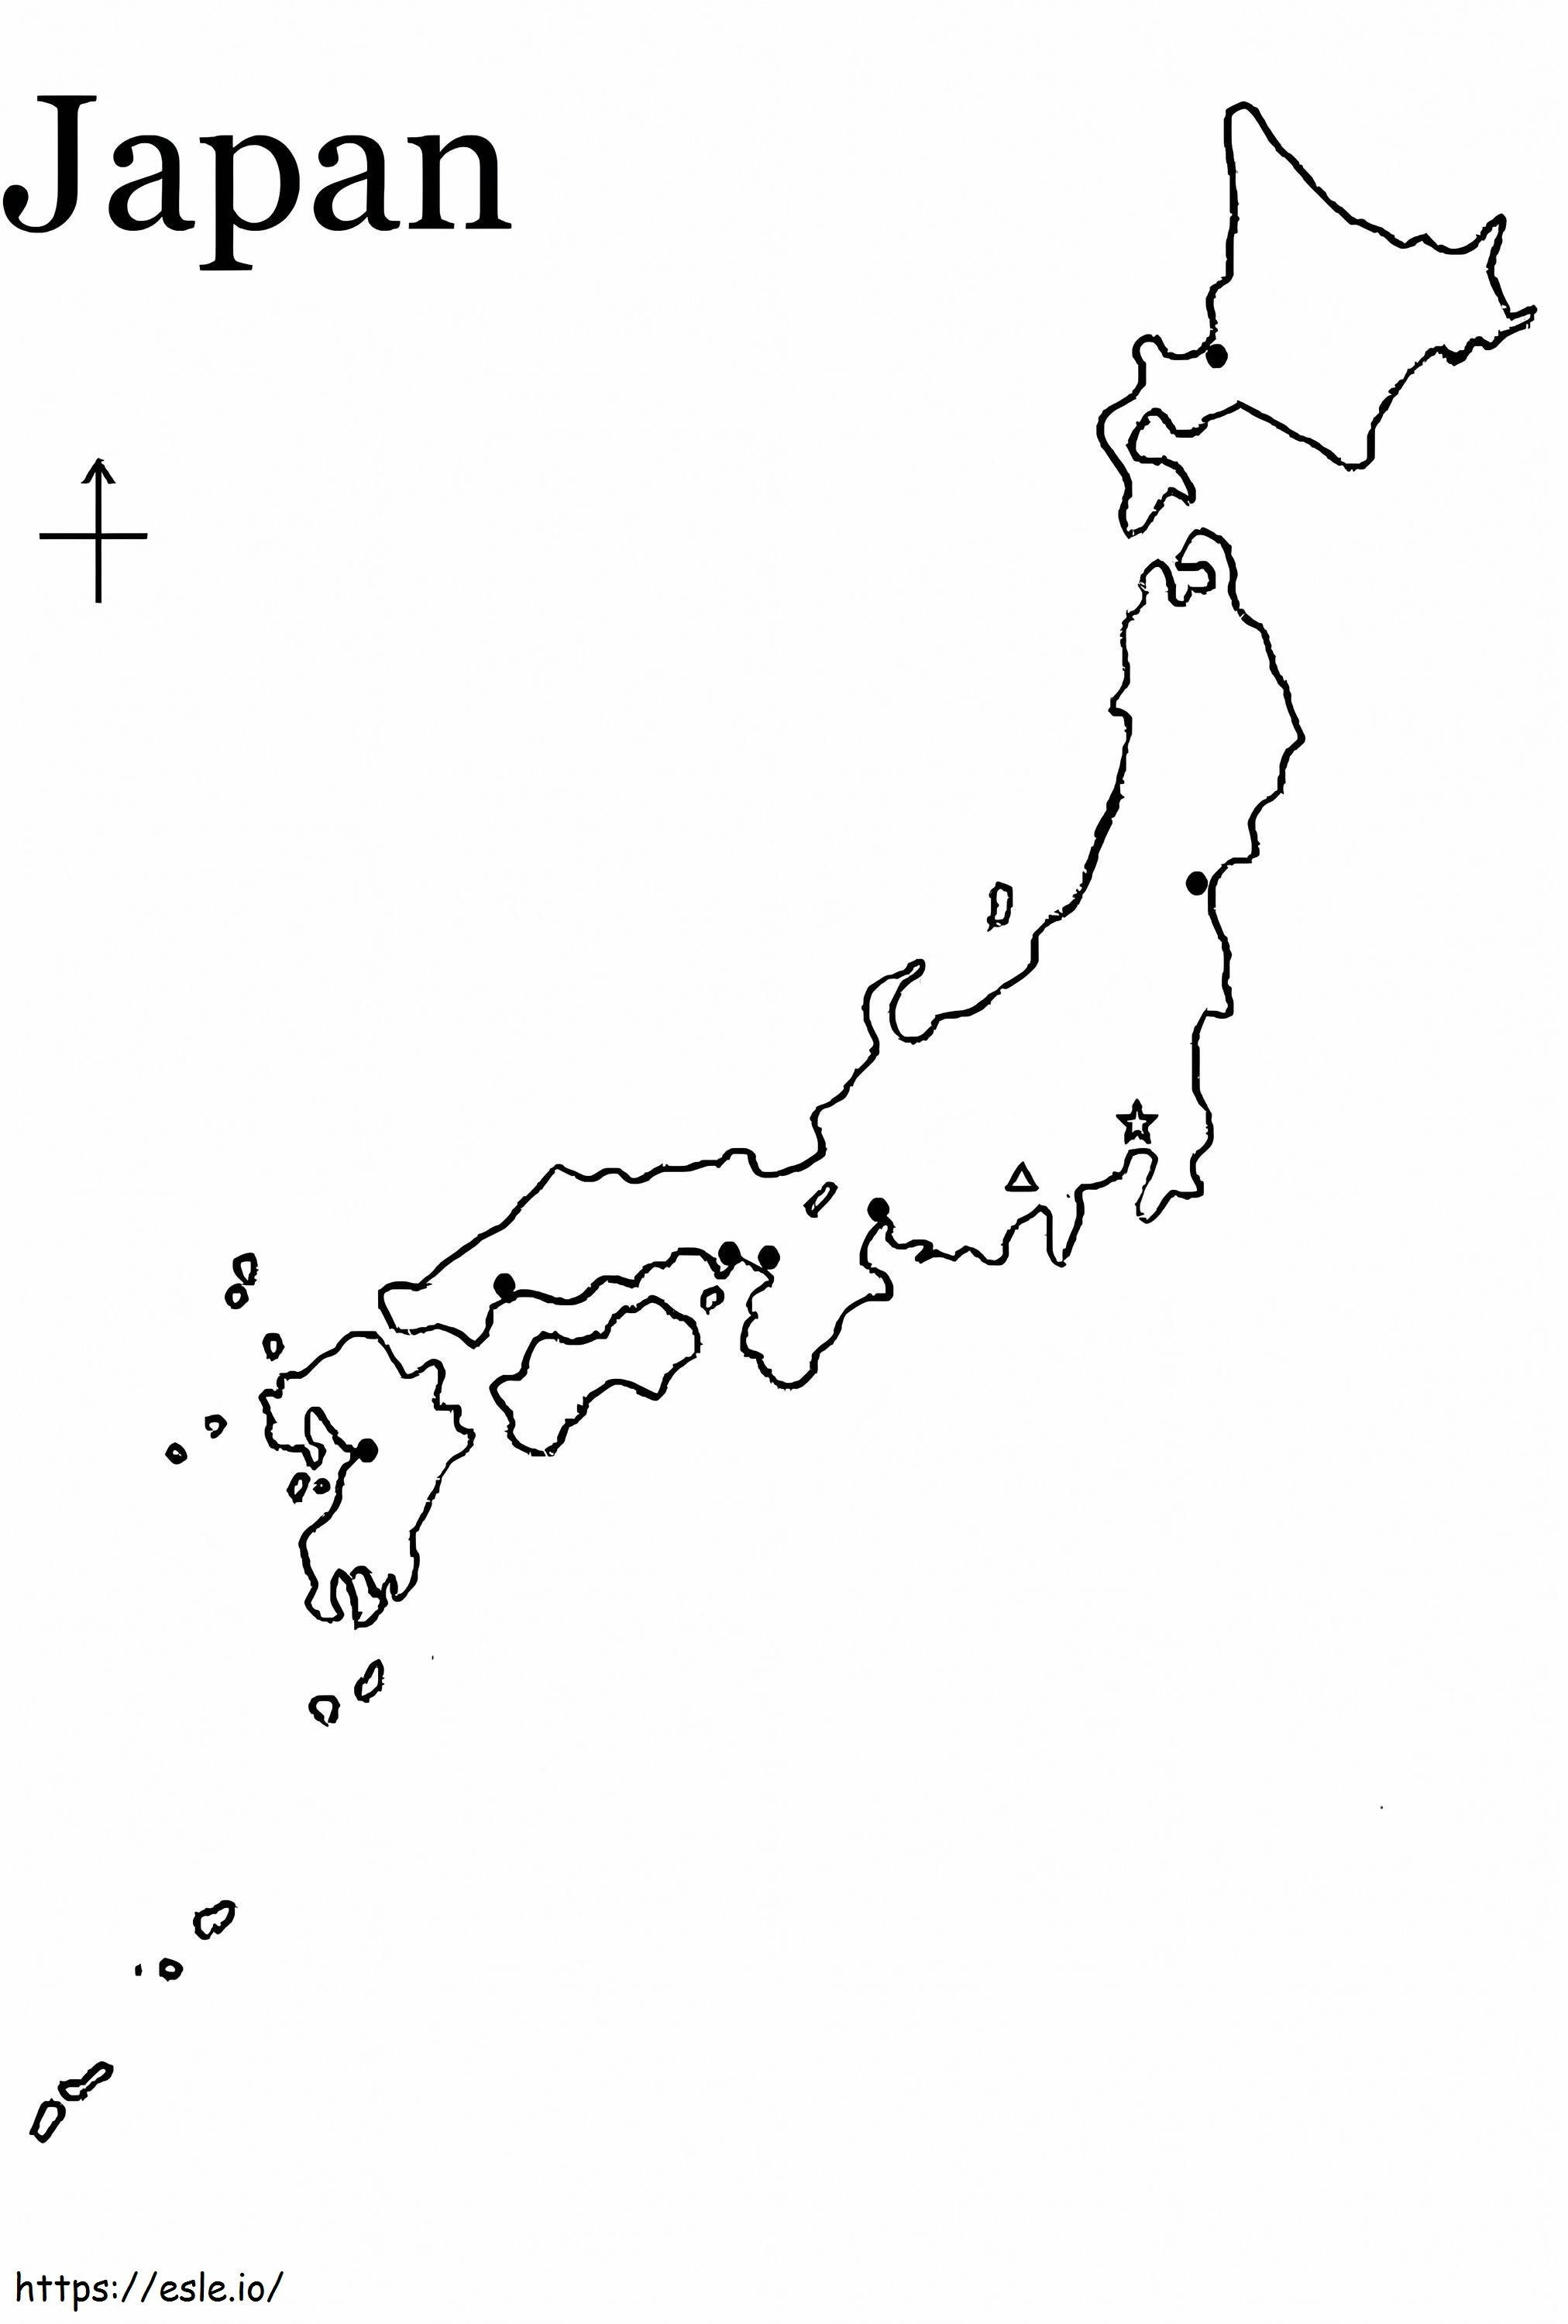 Japans Map coloring page